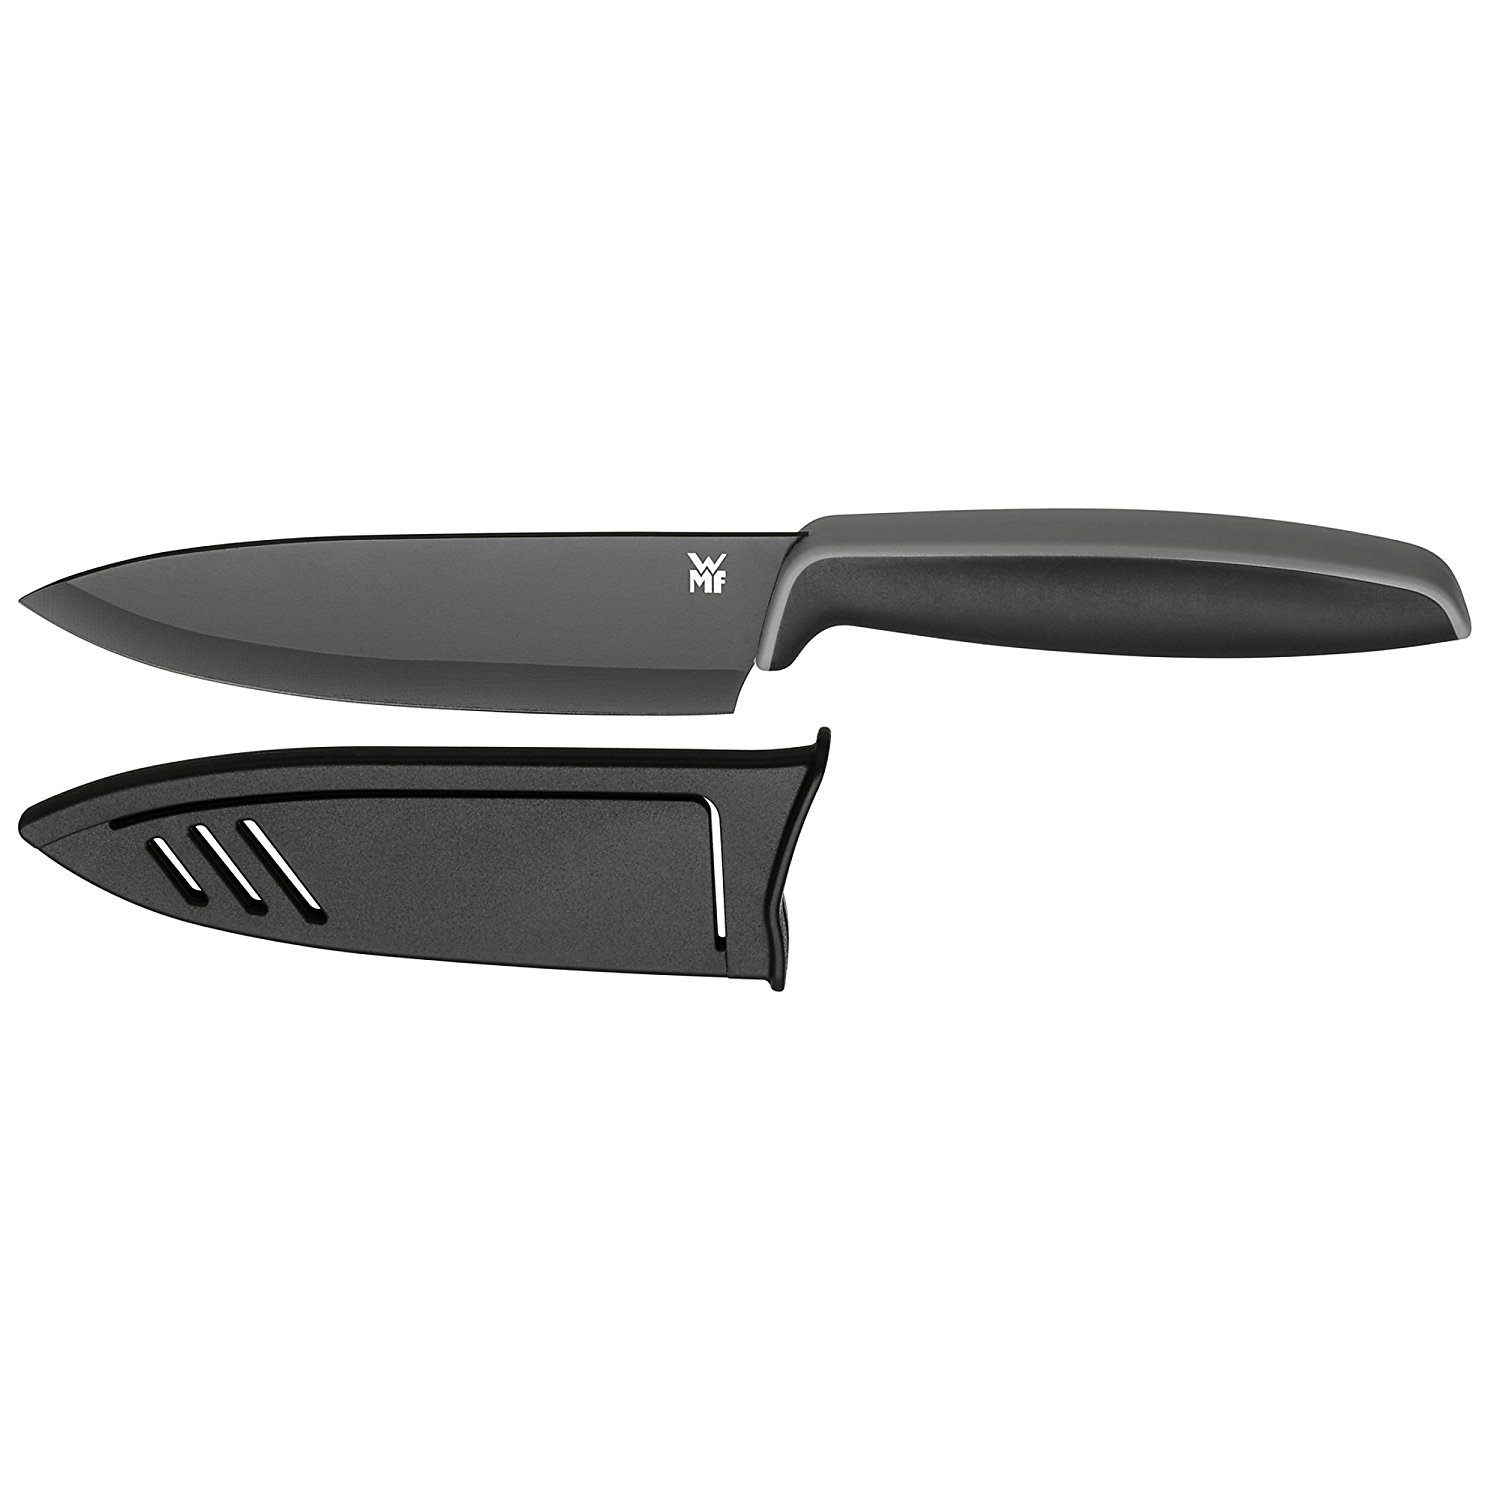 Amazon.com: WMF Touch Chef's Knife, Black: Kitchen & Dining